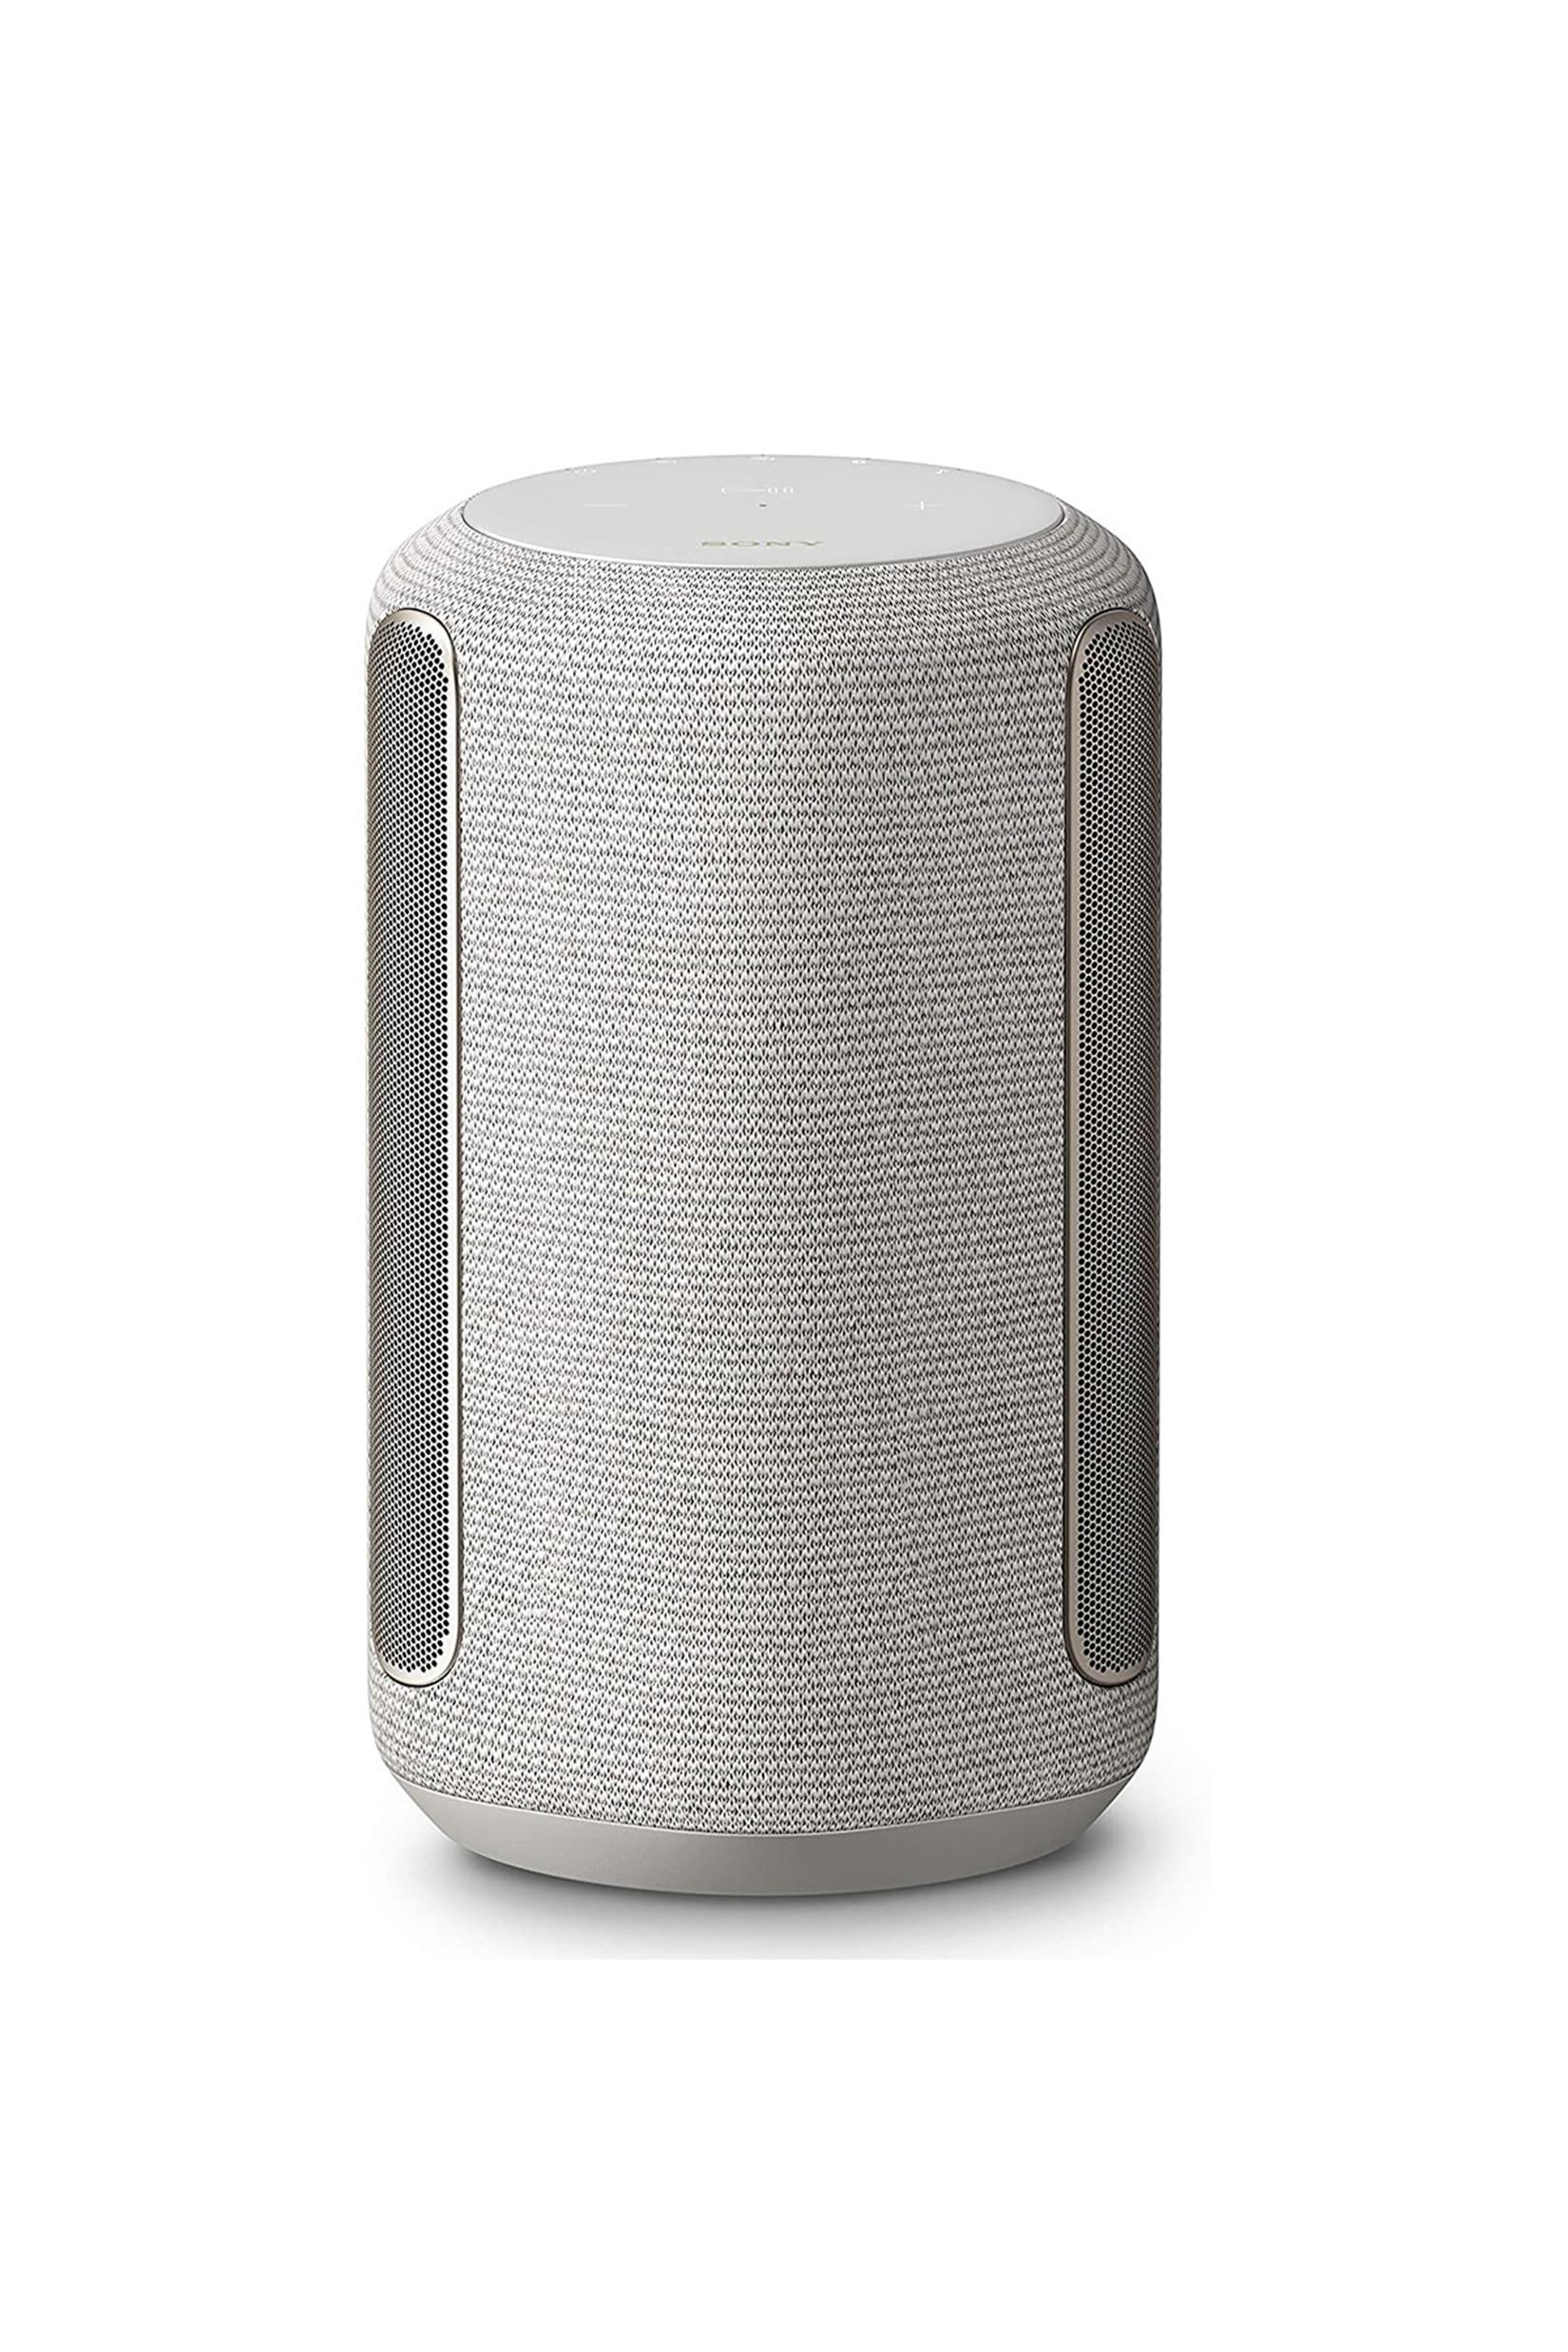 Sony SRS-RA3000 360 Reality Audio Wireless Speaker with Wi-Fi and Bluetooth (White) - image 2 of 4